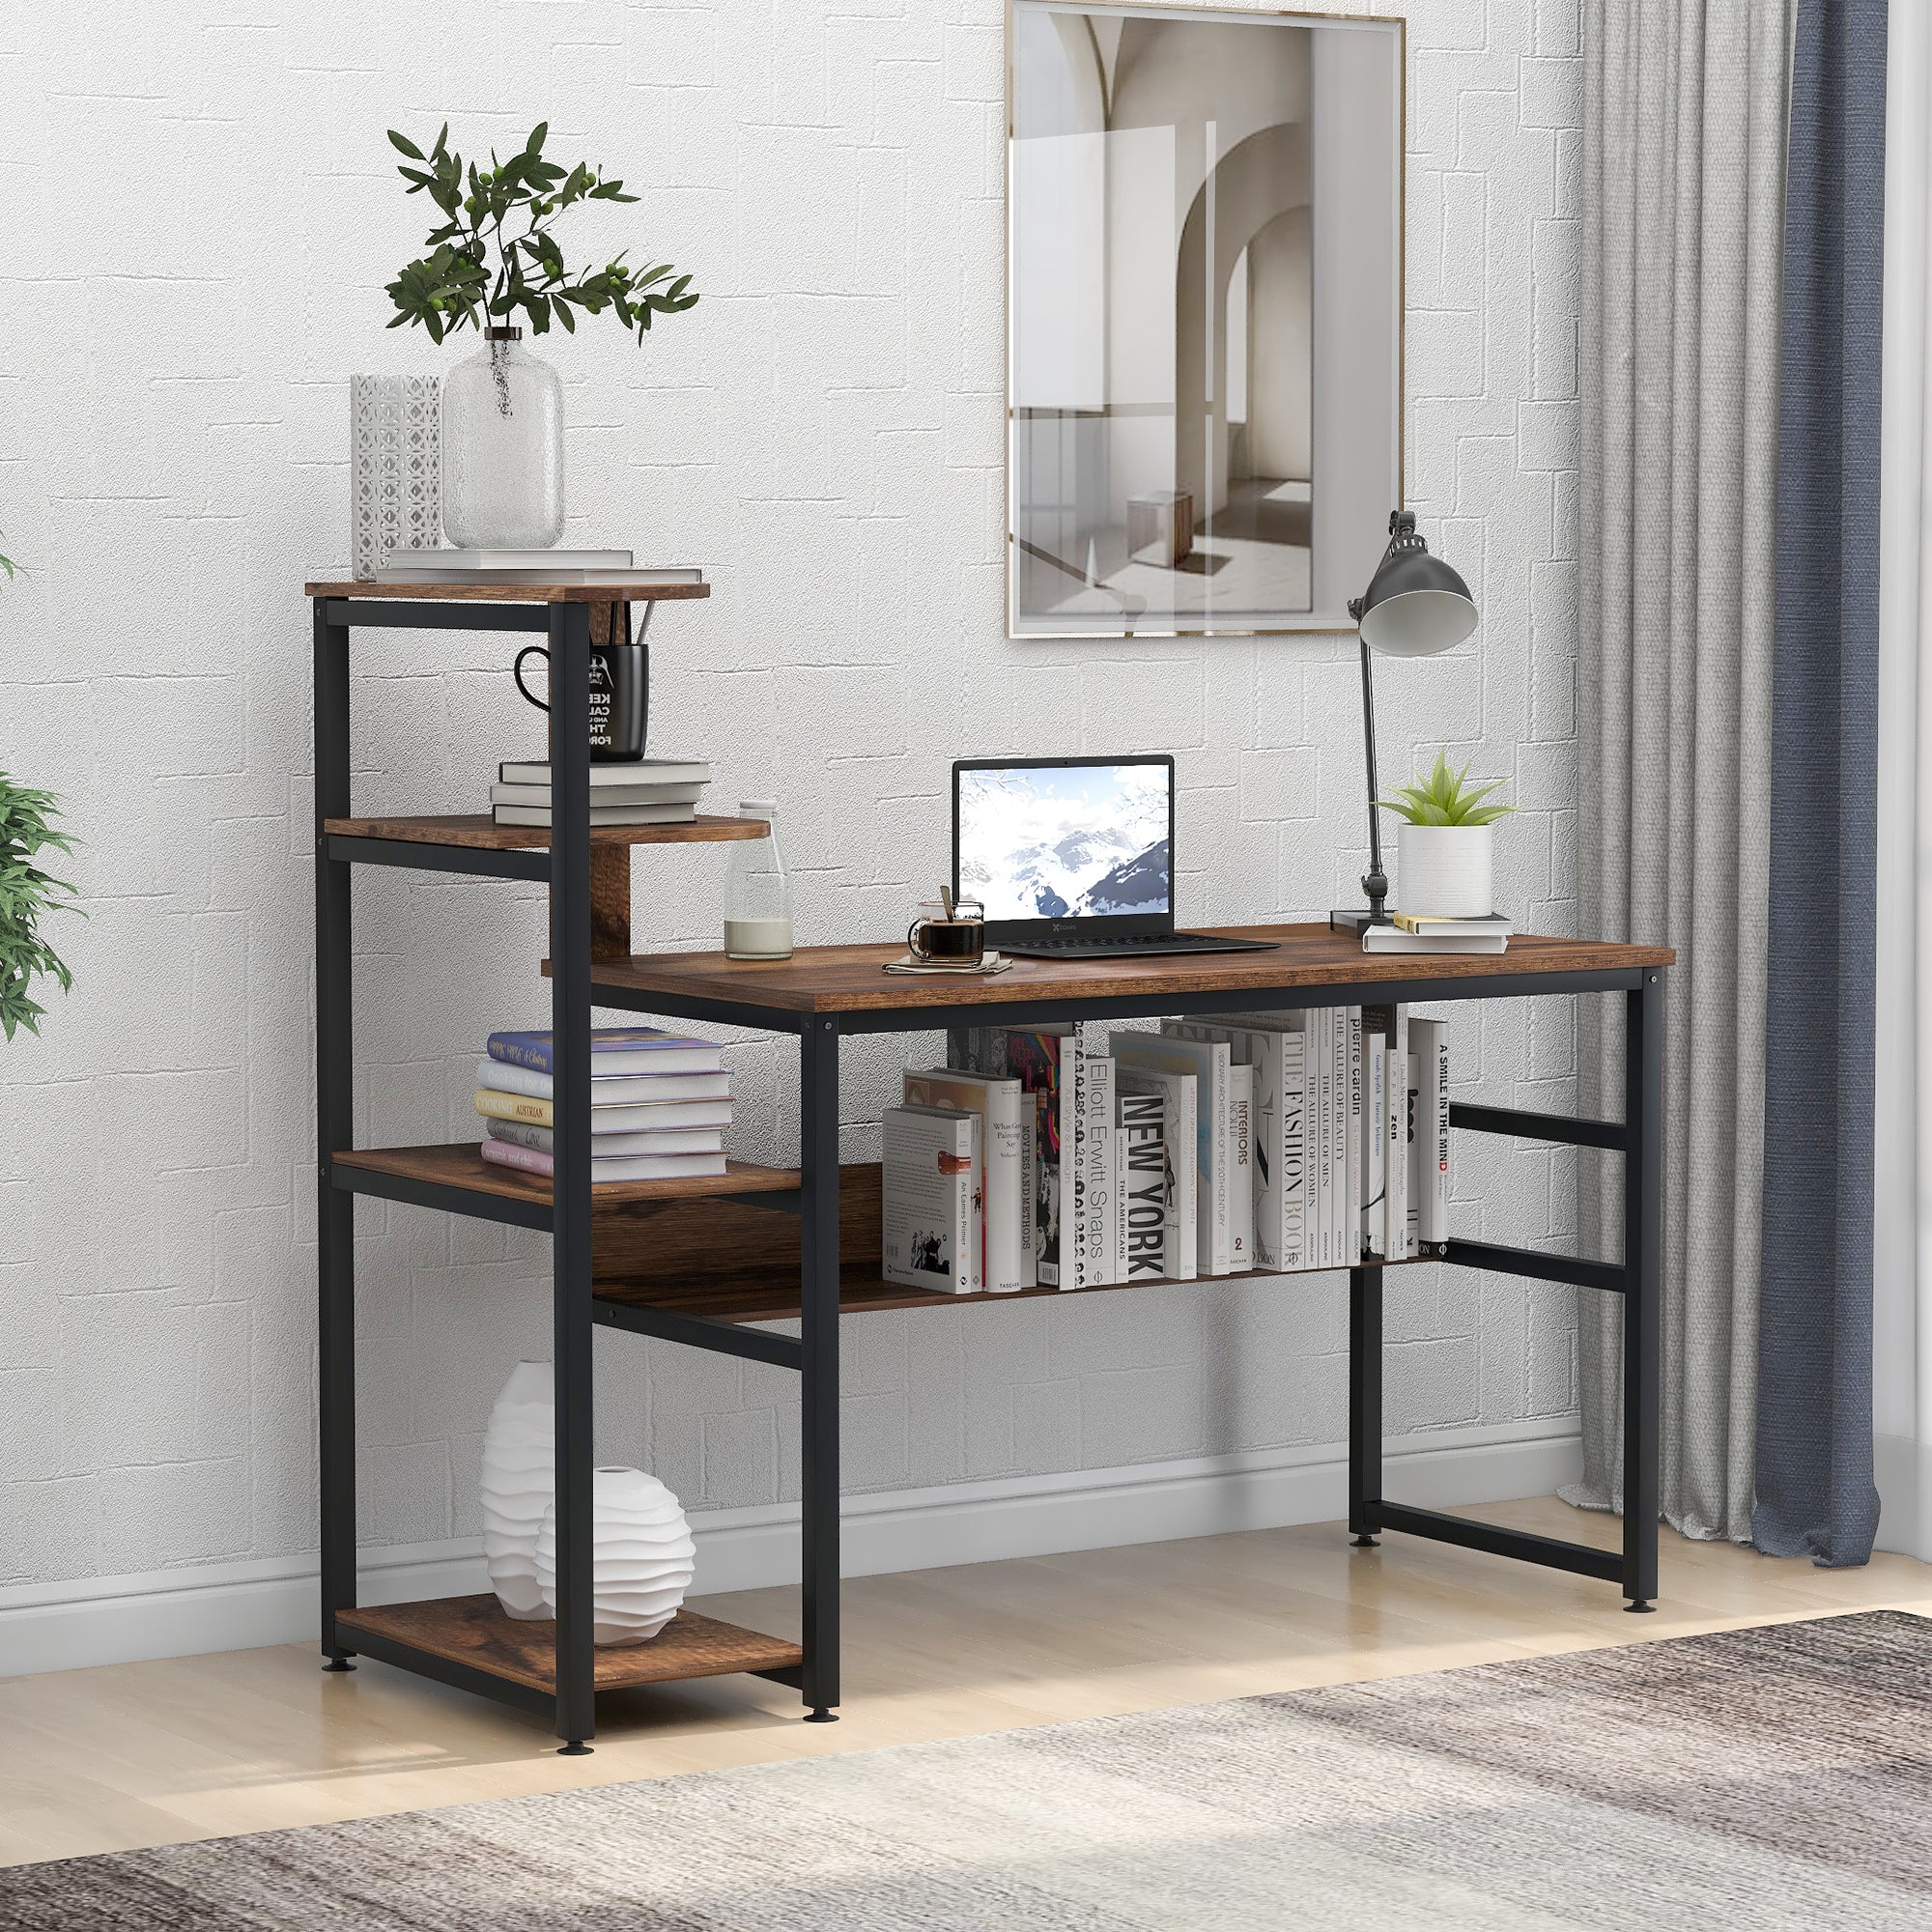 RaDEWAY Home Office Computer Desk with 4-Tier Storage Shelves, 59 inch Large Modern Office Desk Study Writing Table Workstation with Bookshelf and Tower Shelf